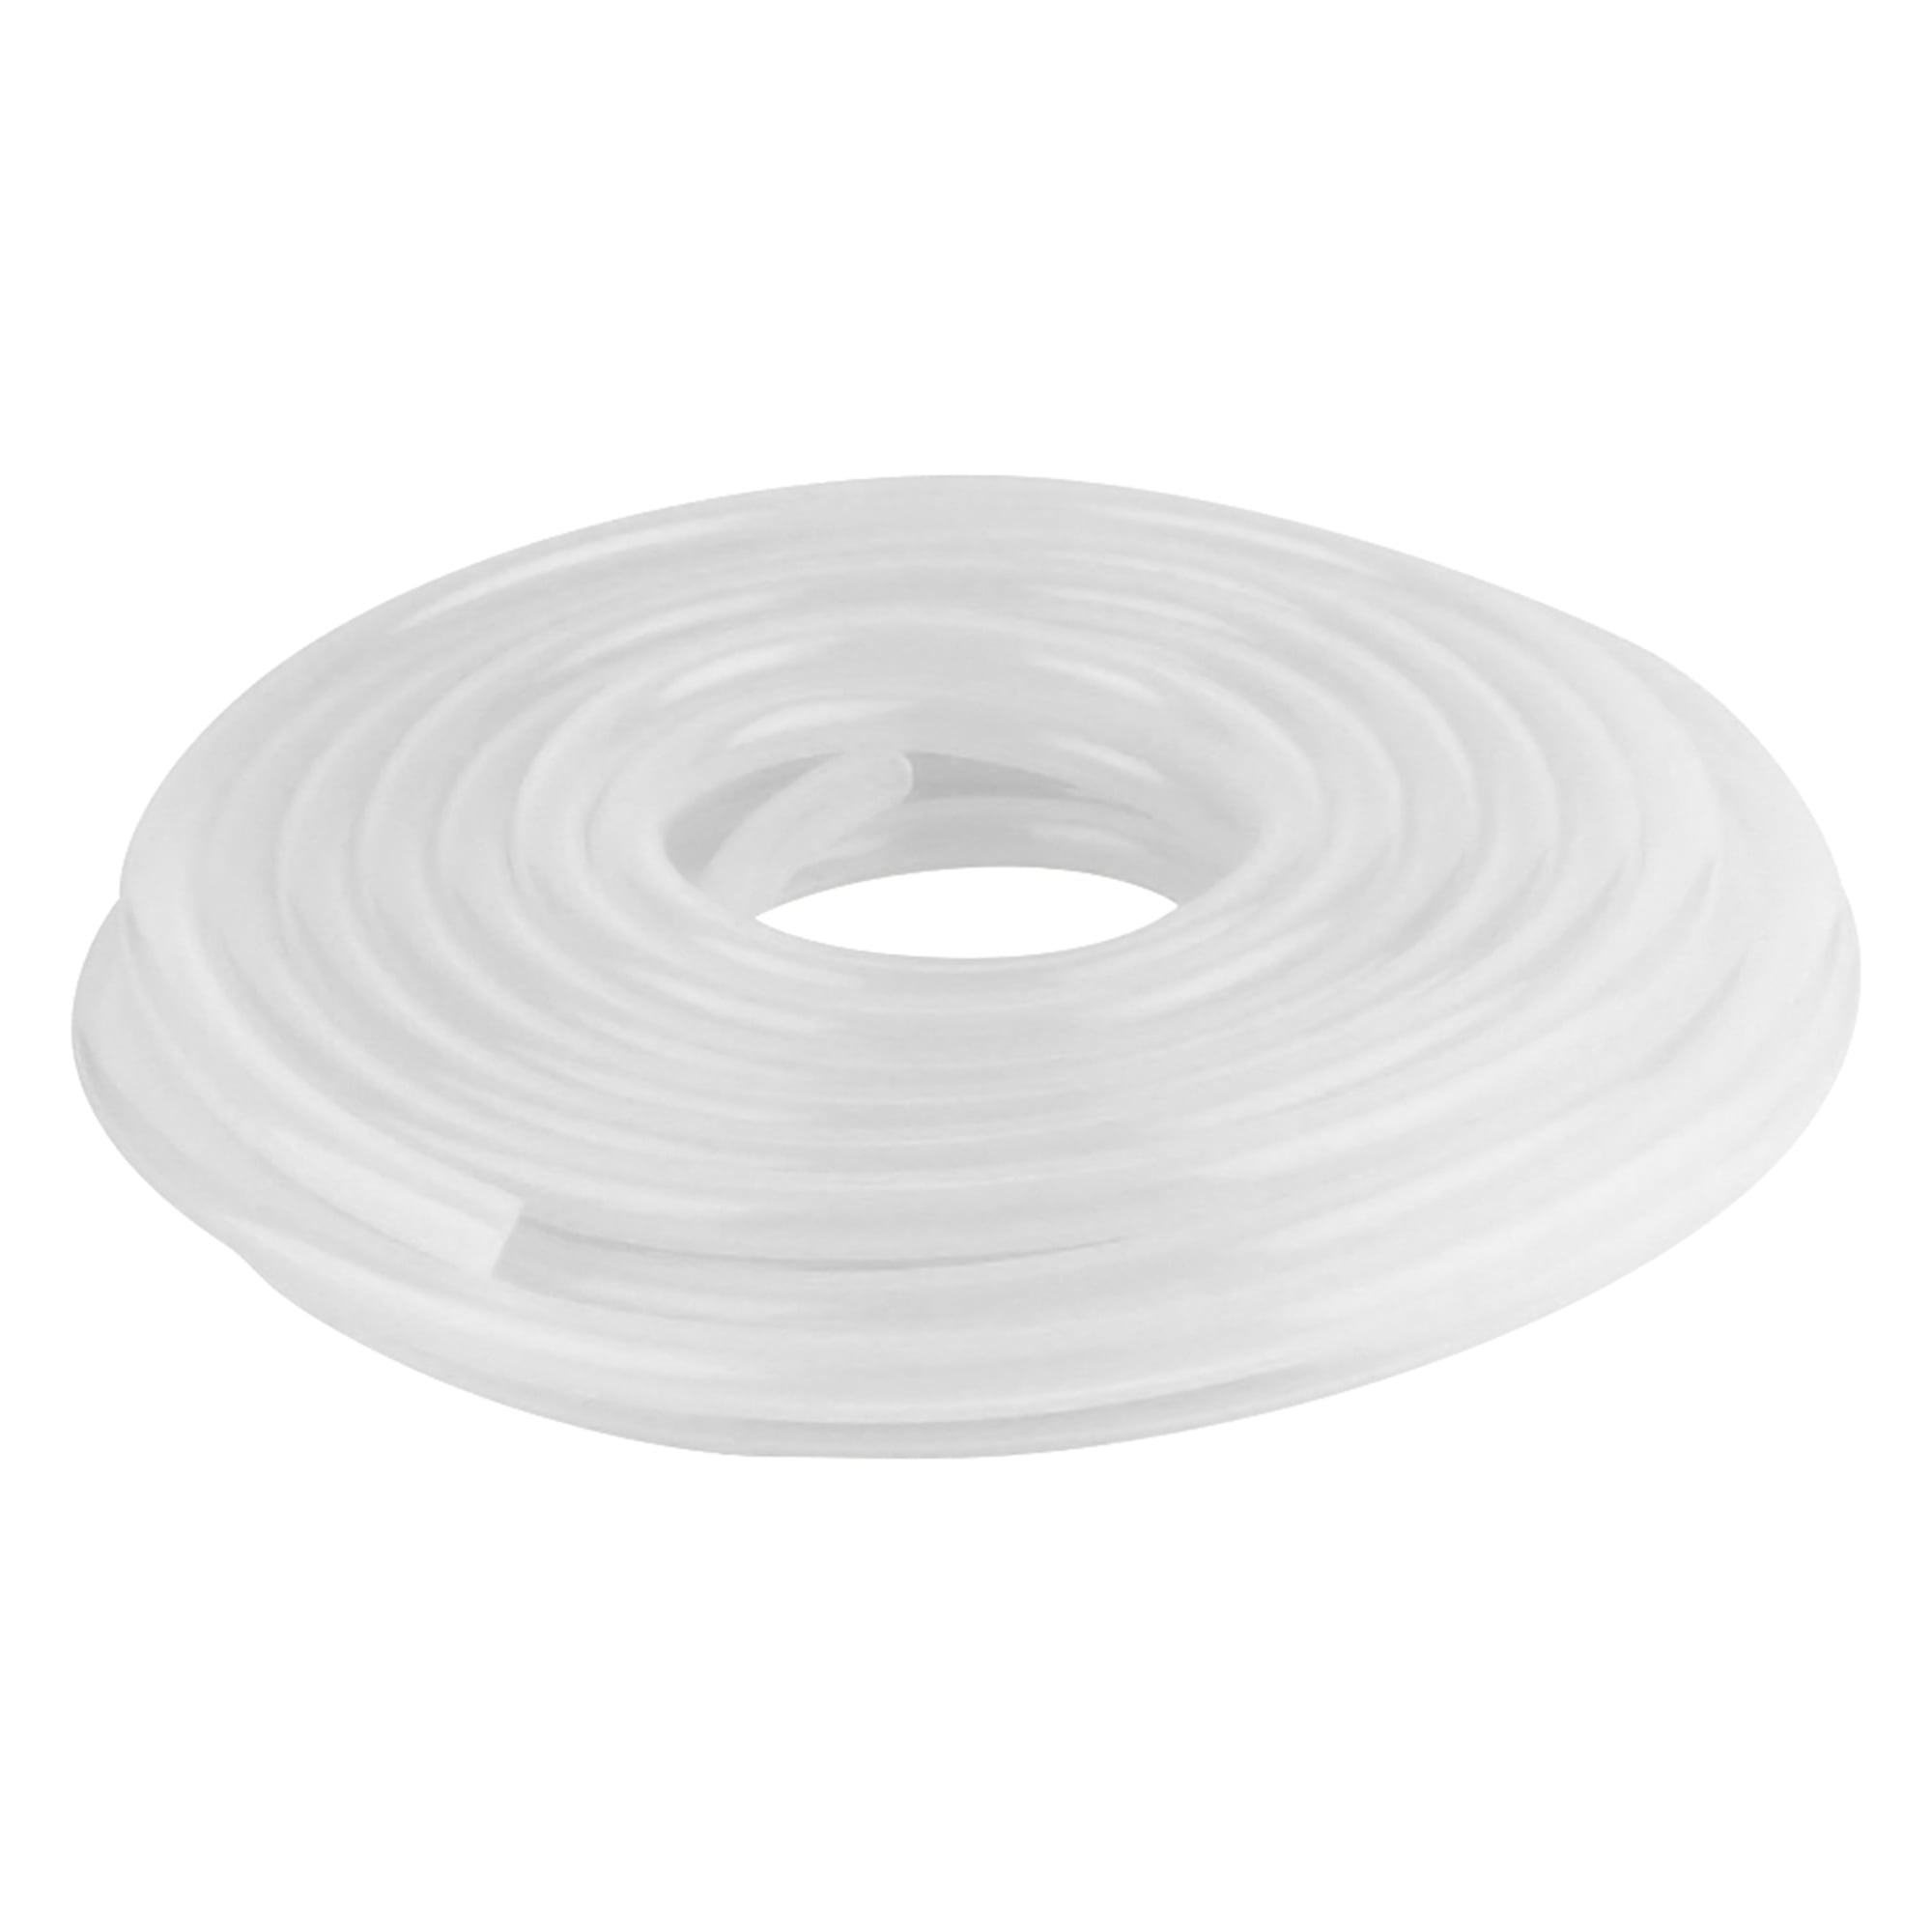 3/16" 5mm Tan Silicone Tubing Sold Per Foot Vacuum Hose Line 1/16" Thick 157V 